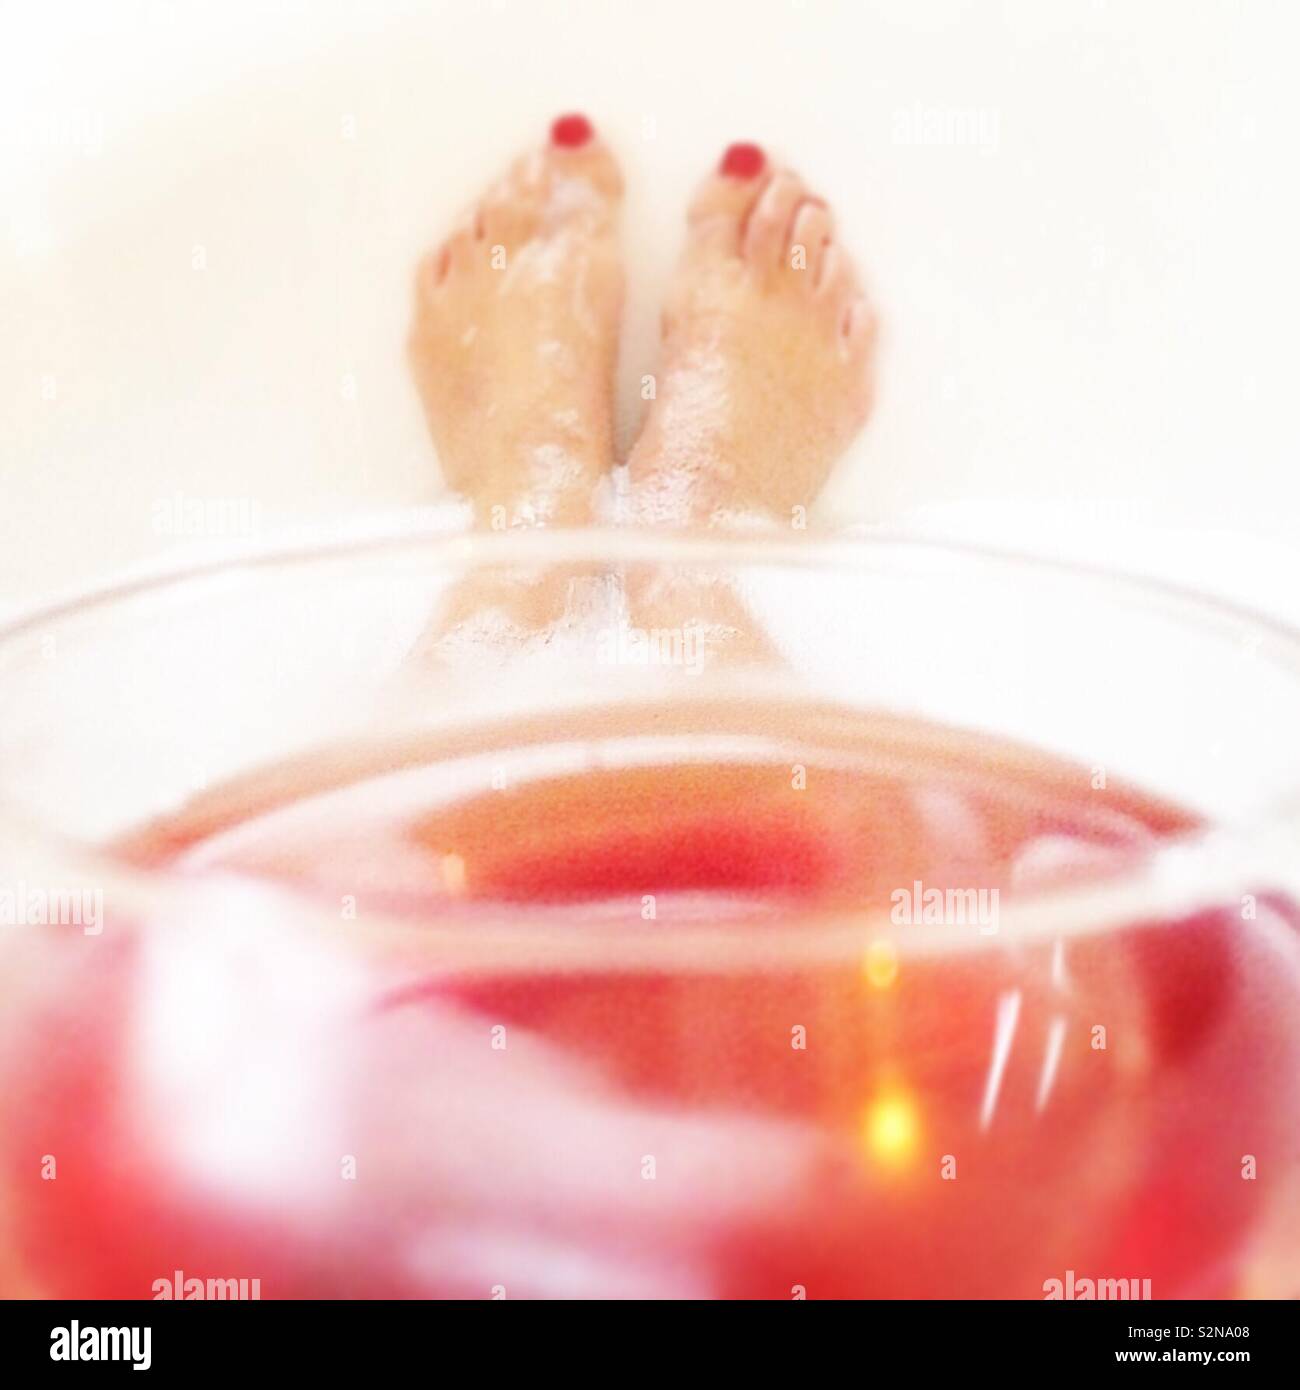 https://c8.alamy.com/comp/S2NA08/a-relaxing-glass-of-ros-in-a-bubble-bath-S2NA08.jpg